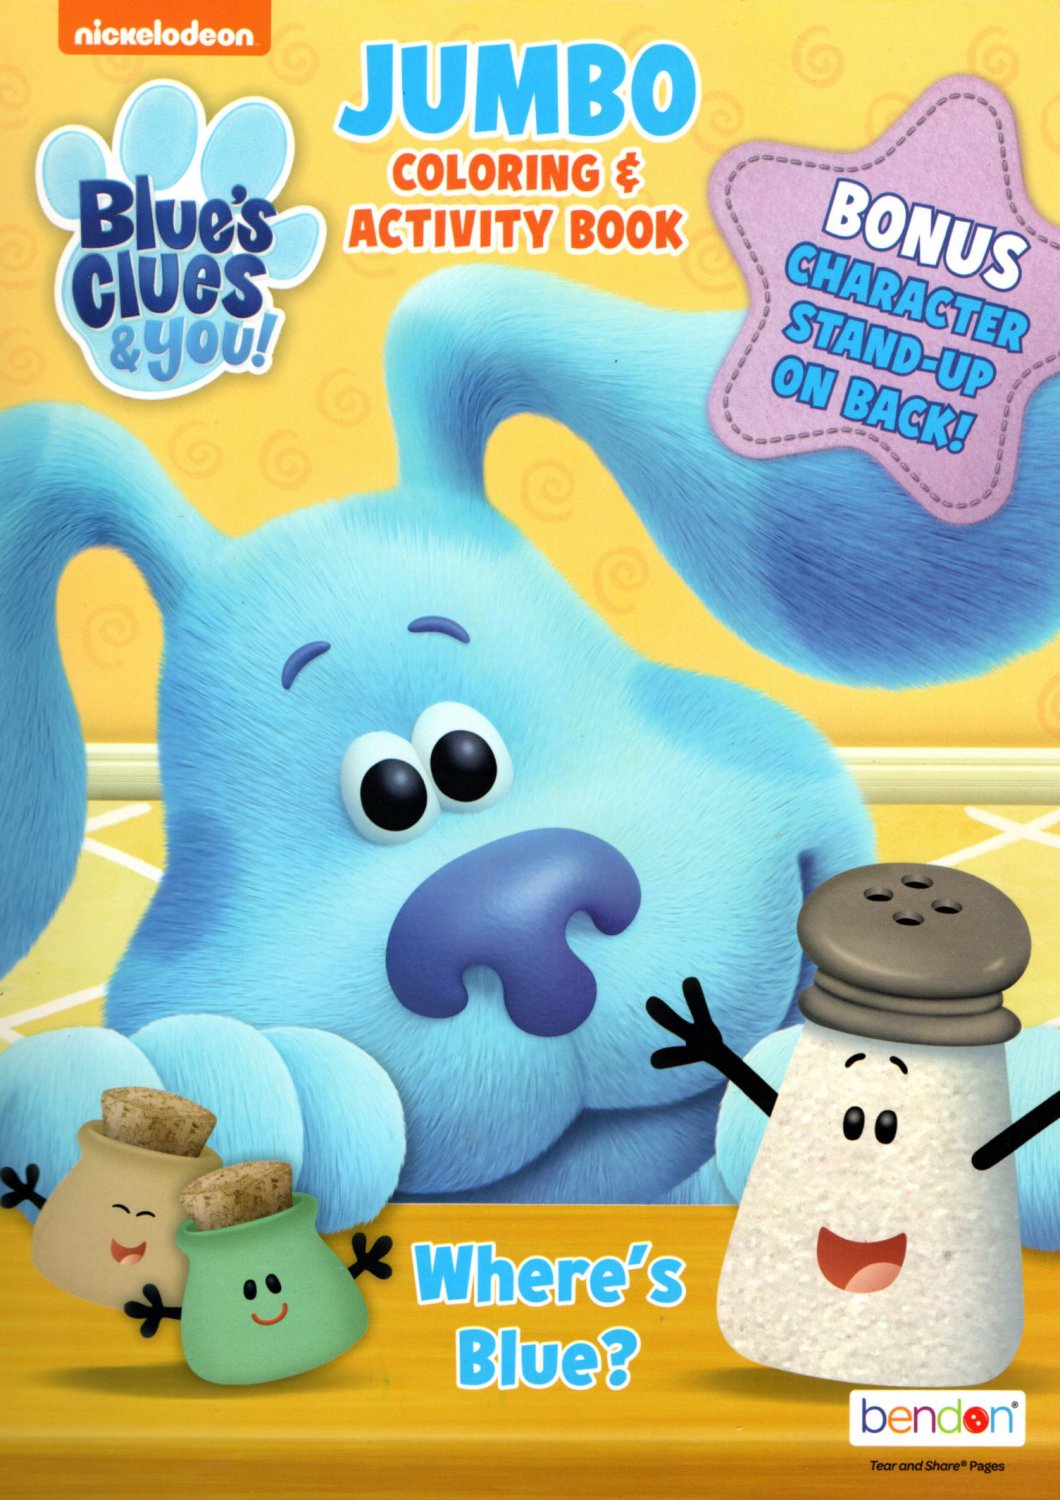 Nickelodeon Blue's Clues & You - Jumbo Coloring & Activity Book - Where's Blue?